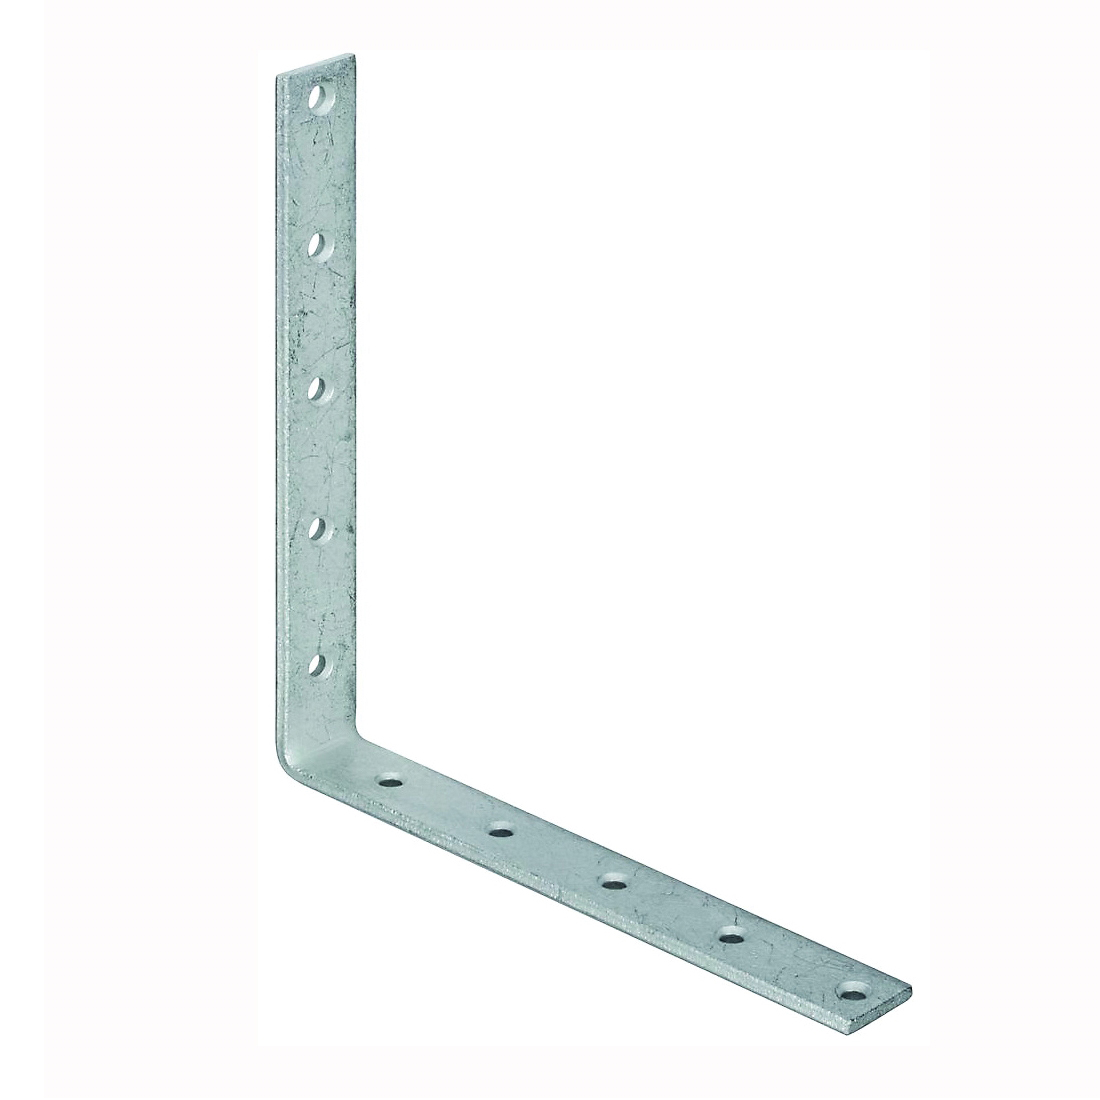 115BC Series N220-244 Corner Brace, 10 in L, 1-1/4 in W, 10 in H, Galvanized Steel, 1/4 Thick Material